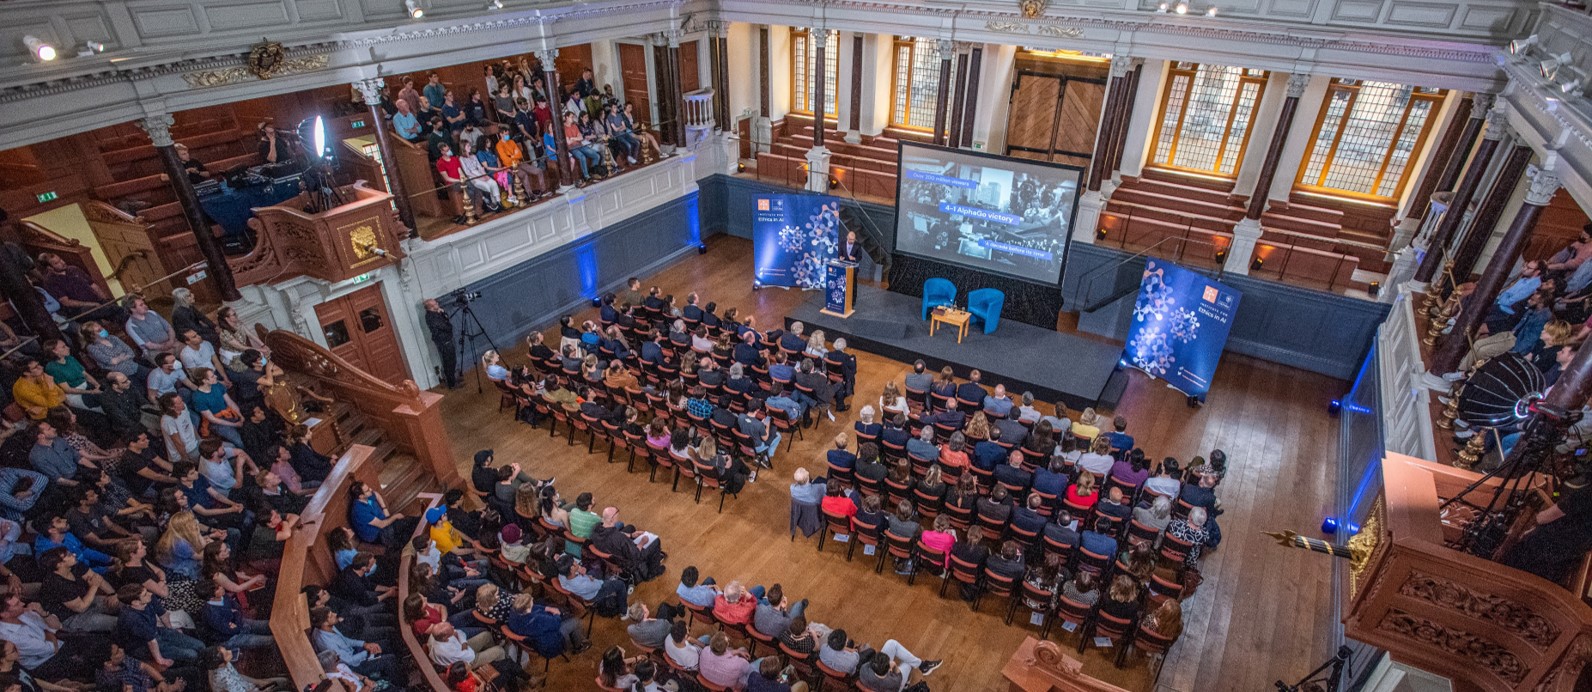 Demis Hassabis delivering his Tanner Lecture to an audience in the Sheldonian Theatre